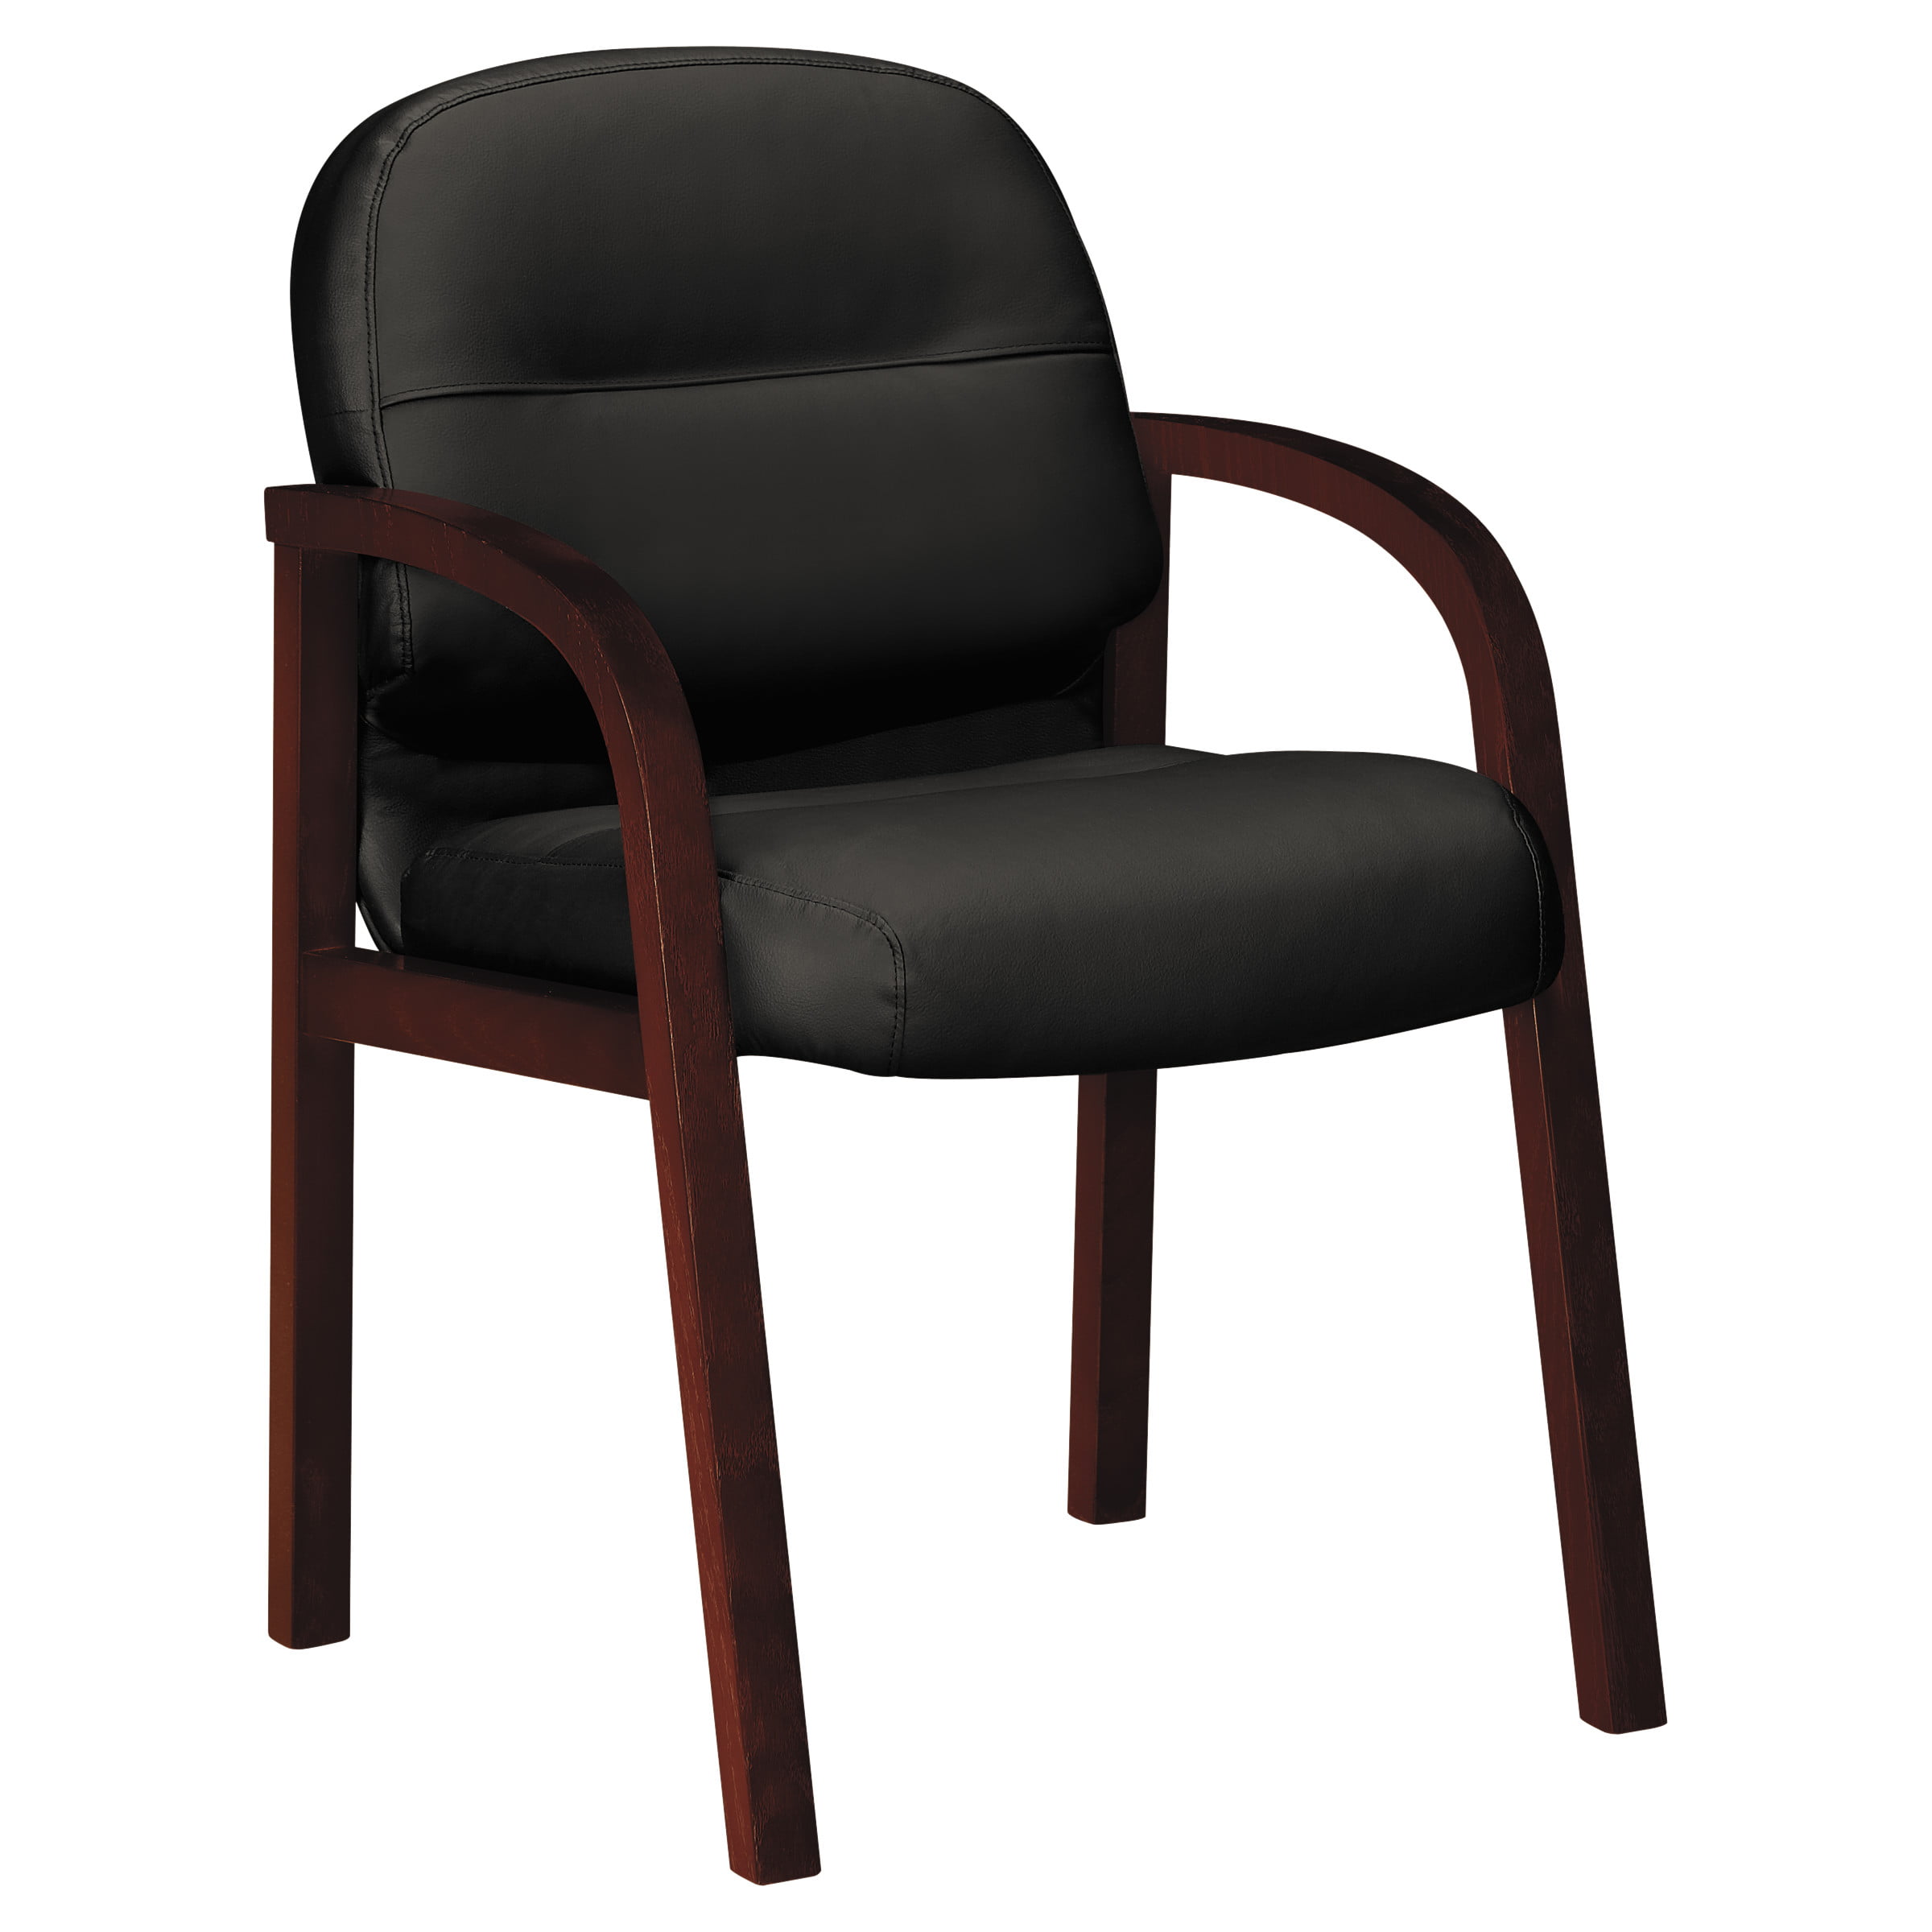 HON 2190 Pillow-Soft Wood Series Guest Reception Waiting Room Arm Chair